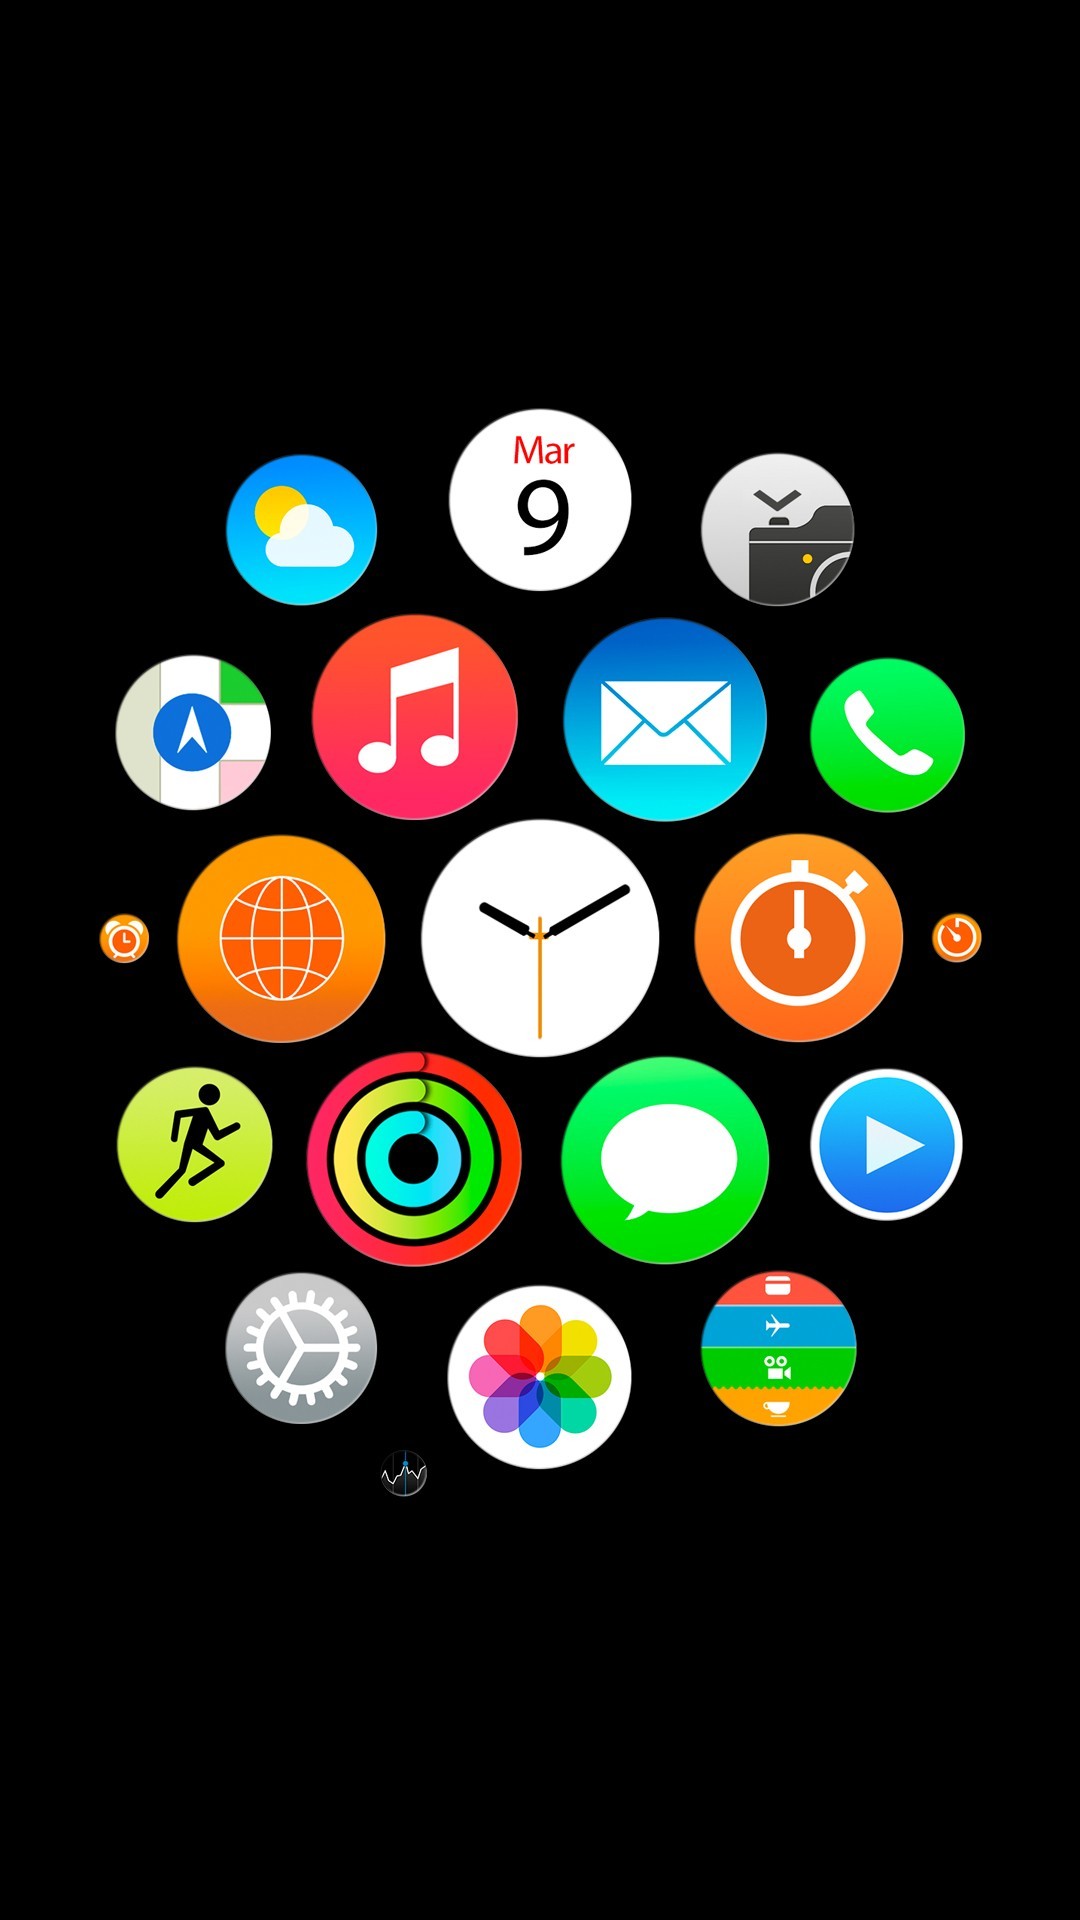 1080x1920 ... Black Apple Watch wallpaper for iPhone 6 ...